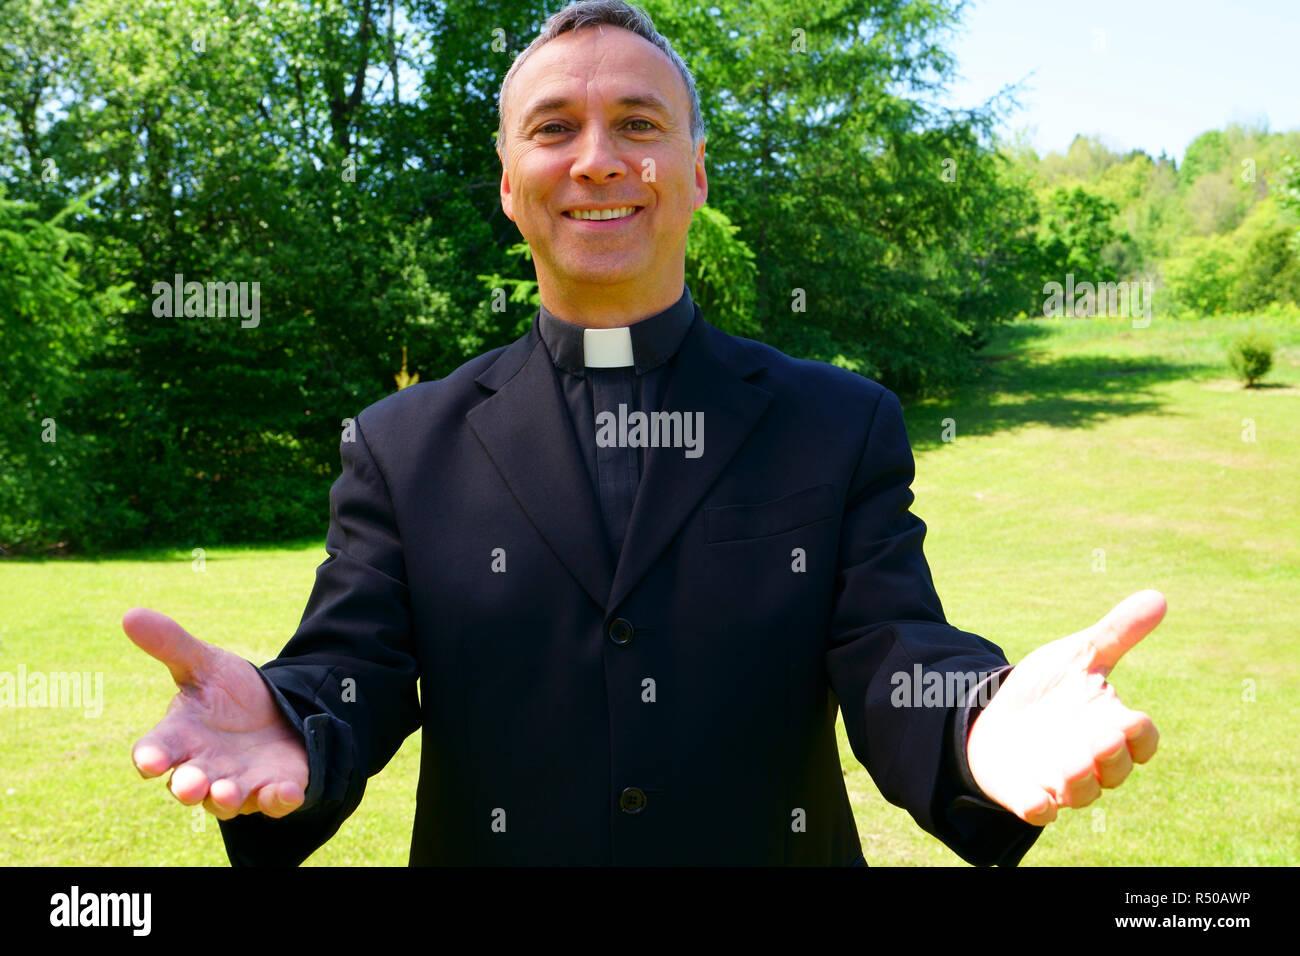 A good looking catholic priest is welcoming us in joy. He looks at us with optimism, openning his arms in peace. Stock Photo